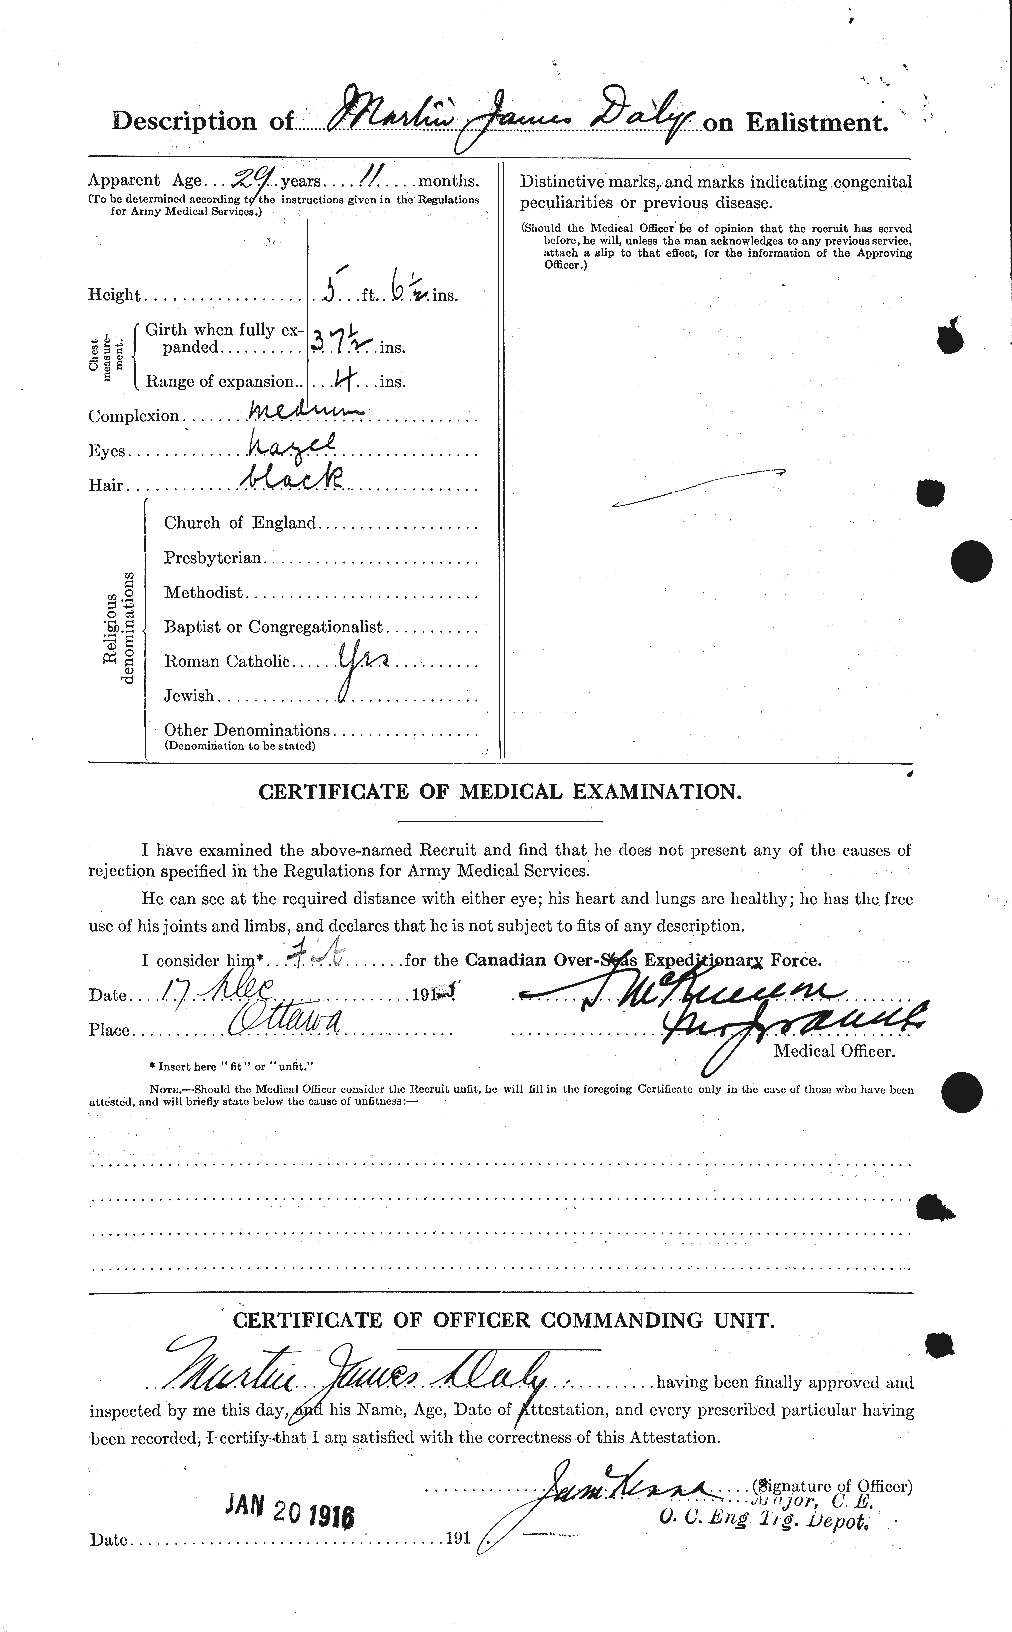 Personnel Records of the First World War - CEF 276375b